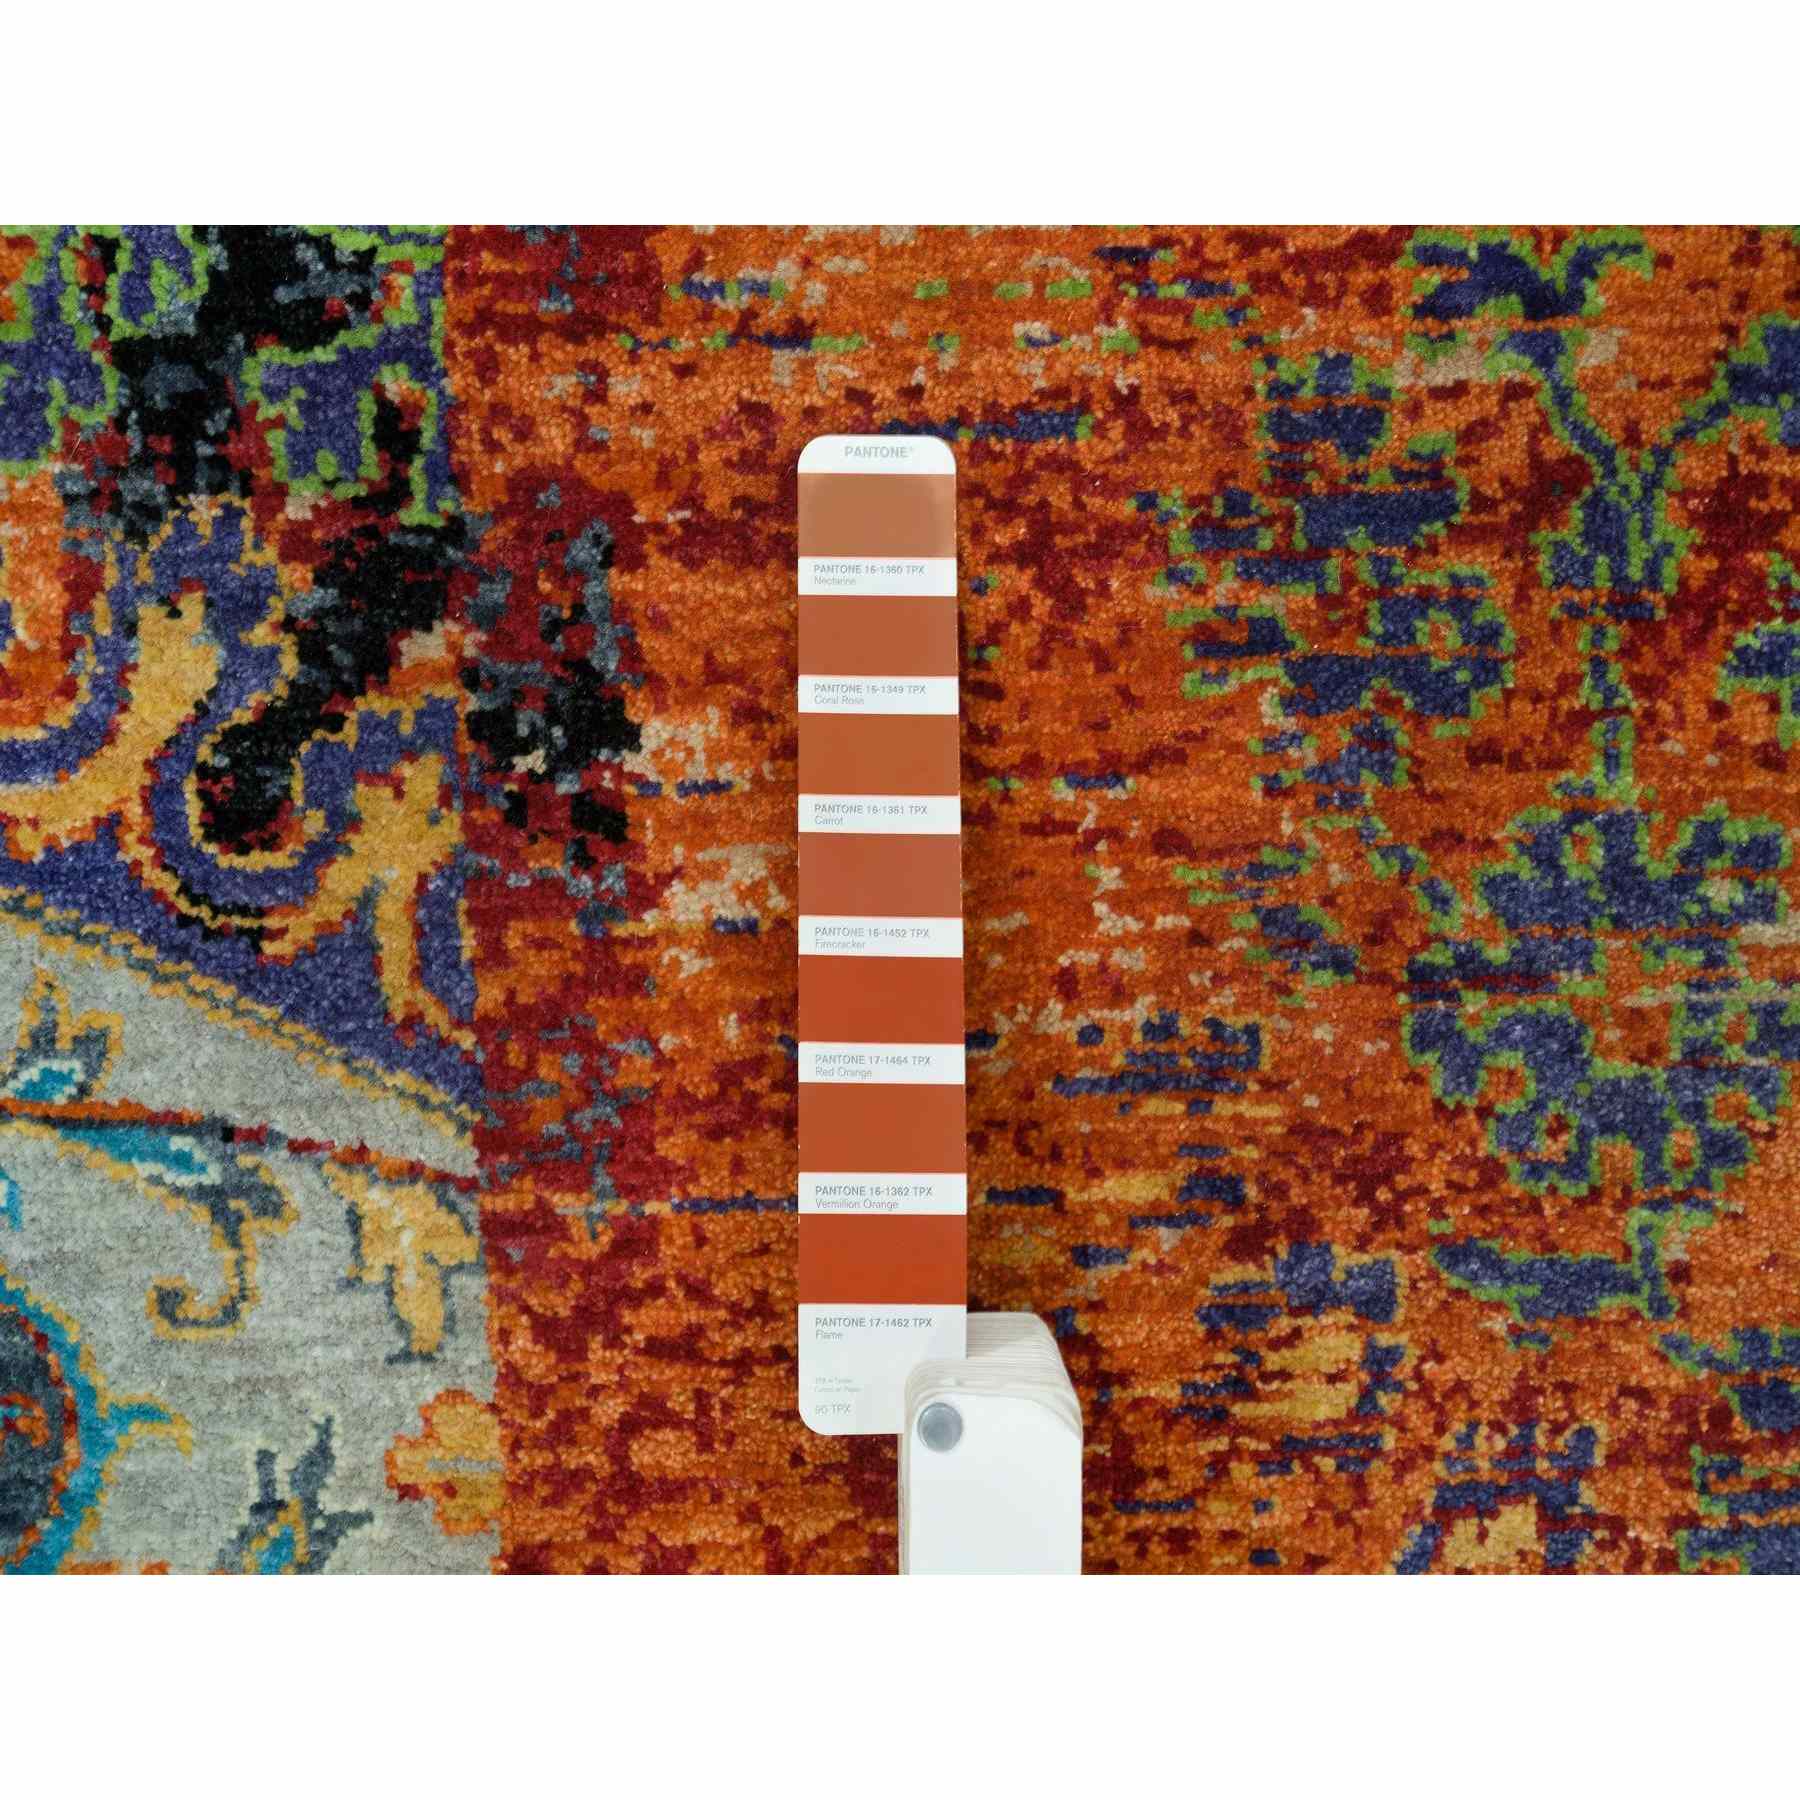 Transitional-Hand-Knotted-Rug-329520